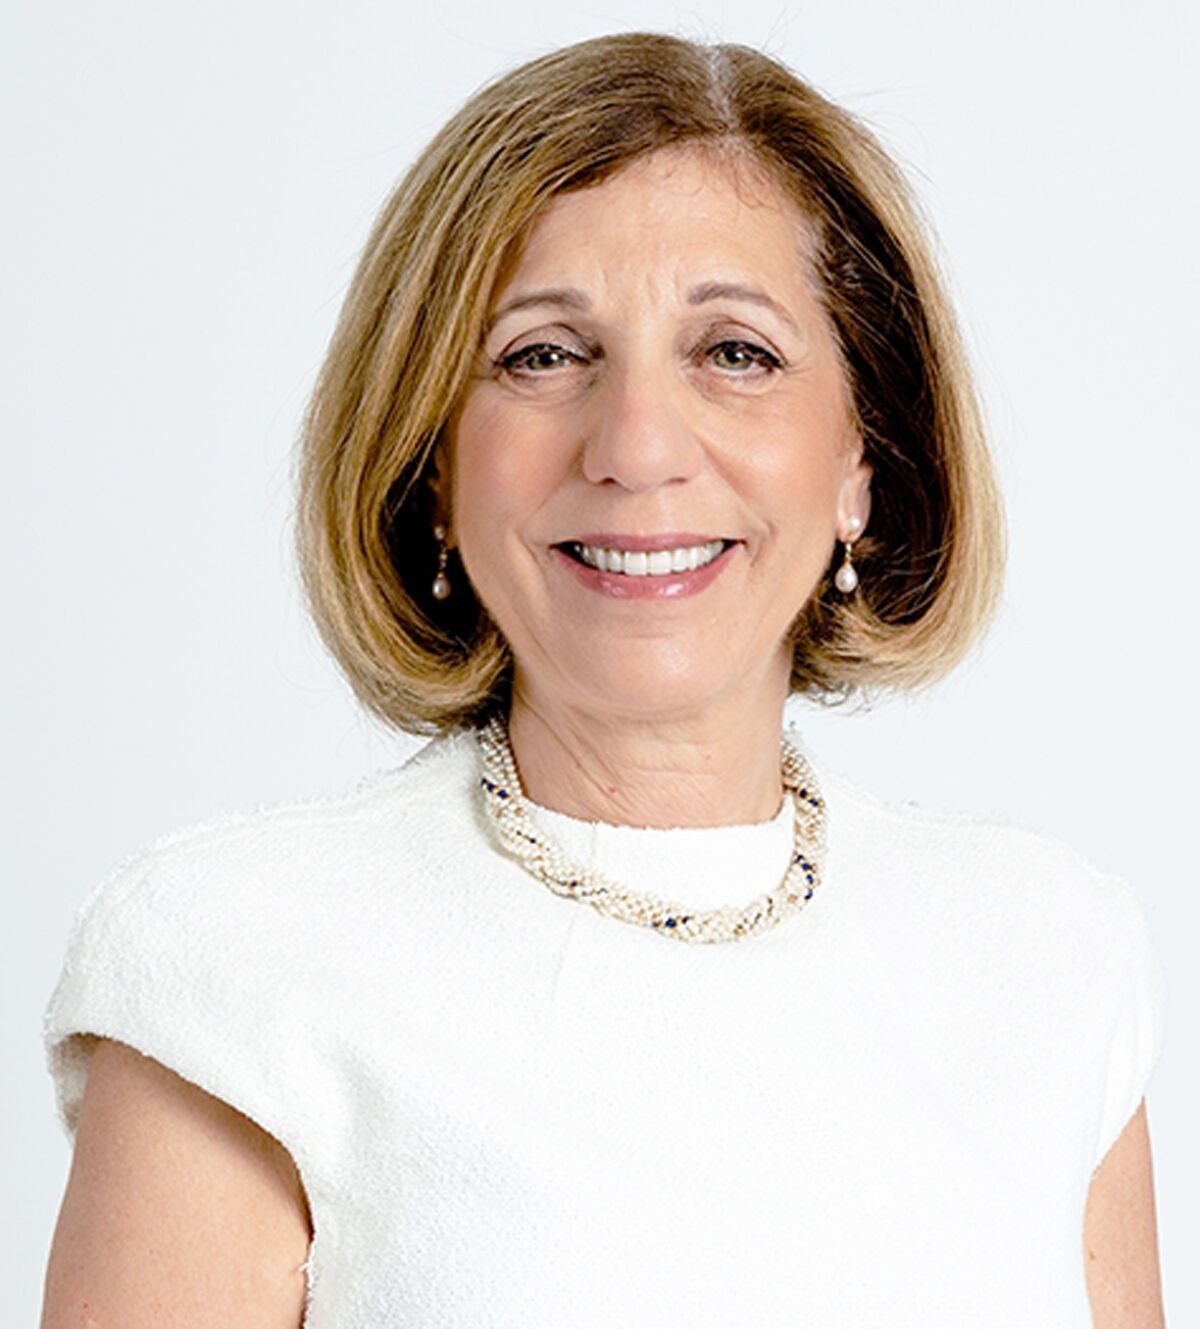 Barbara Bry of La Jolla has served four years on the San Diego City Council representing District 1.